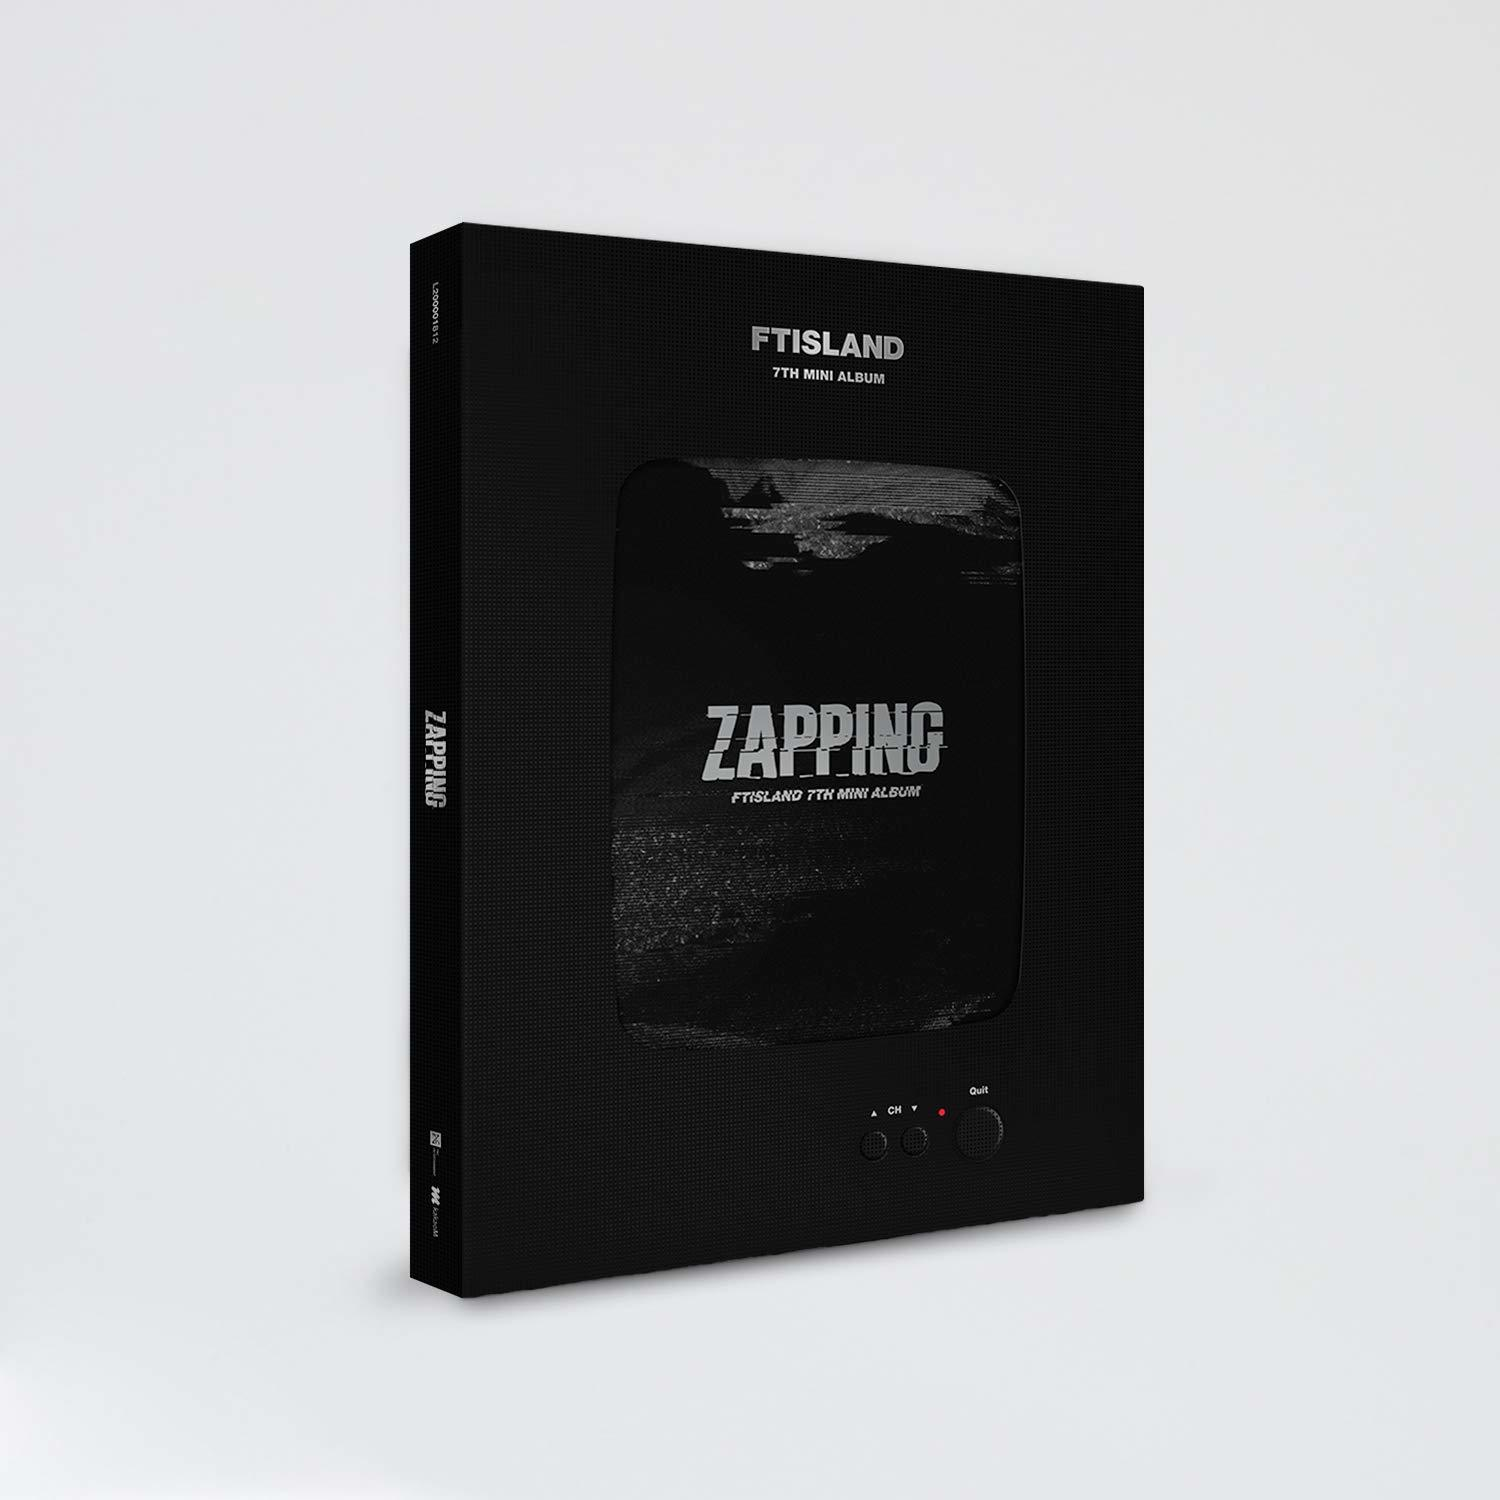 F.T. Poster) (incl. + - Buch) Zapping Photocard, Booklet, - Island (CD